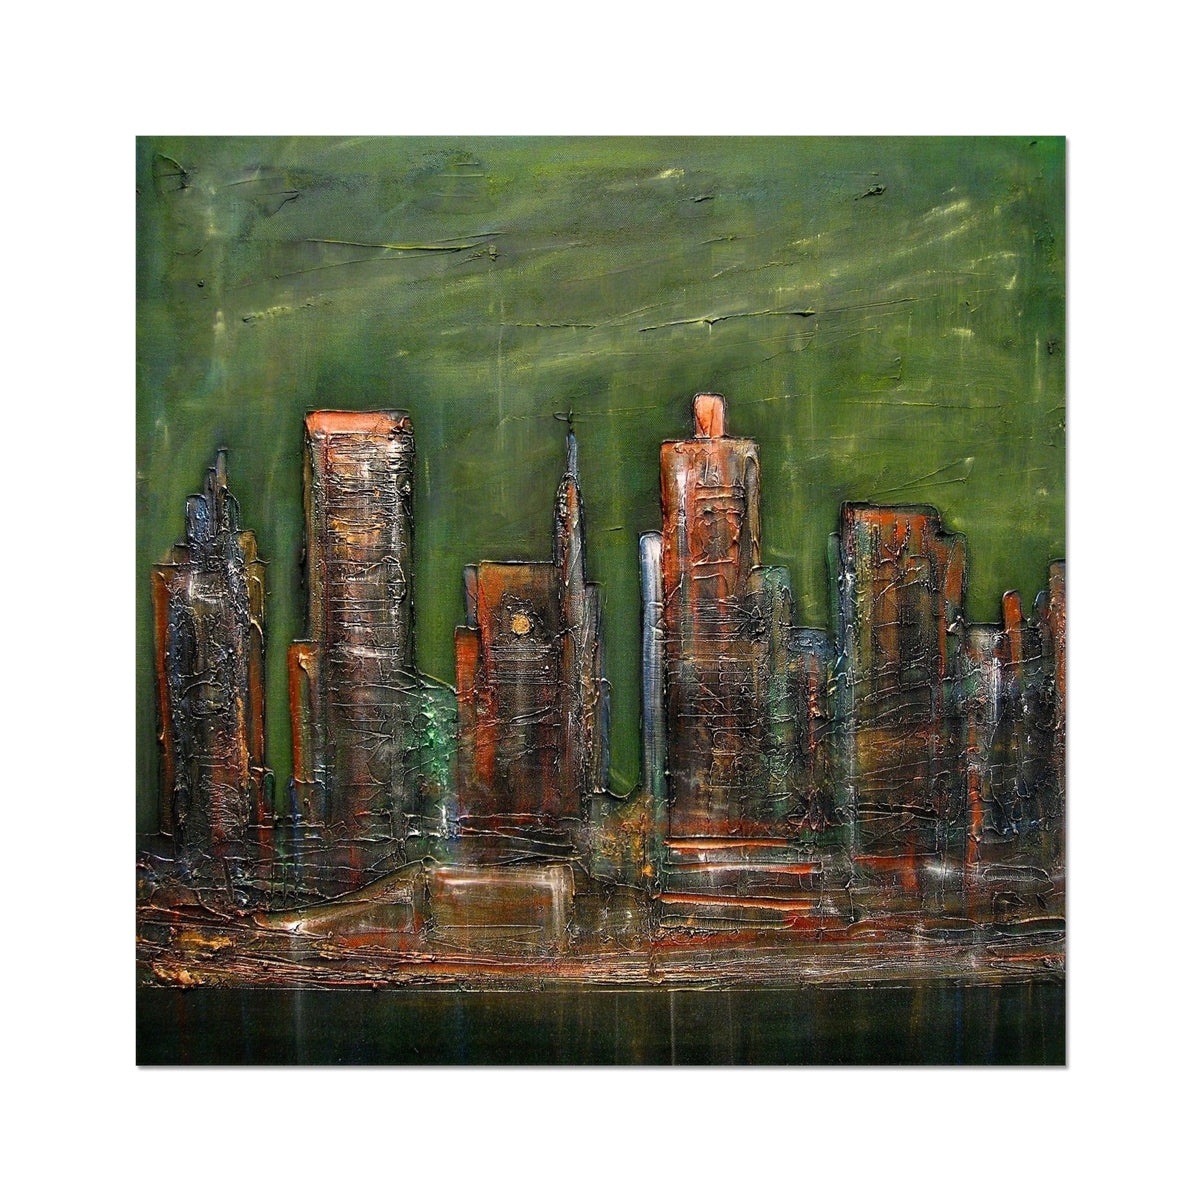 A Neon New York Painting | Artist Proof Collector Prints From Scotland-Artist Proof Collector Prints-World Art Gallery-20"x20"-Paintings, Prints, Homeware, Art Gifts From Scotland By Scottish Artist Kevin Hunter